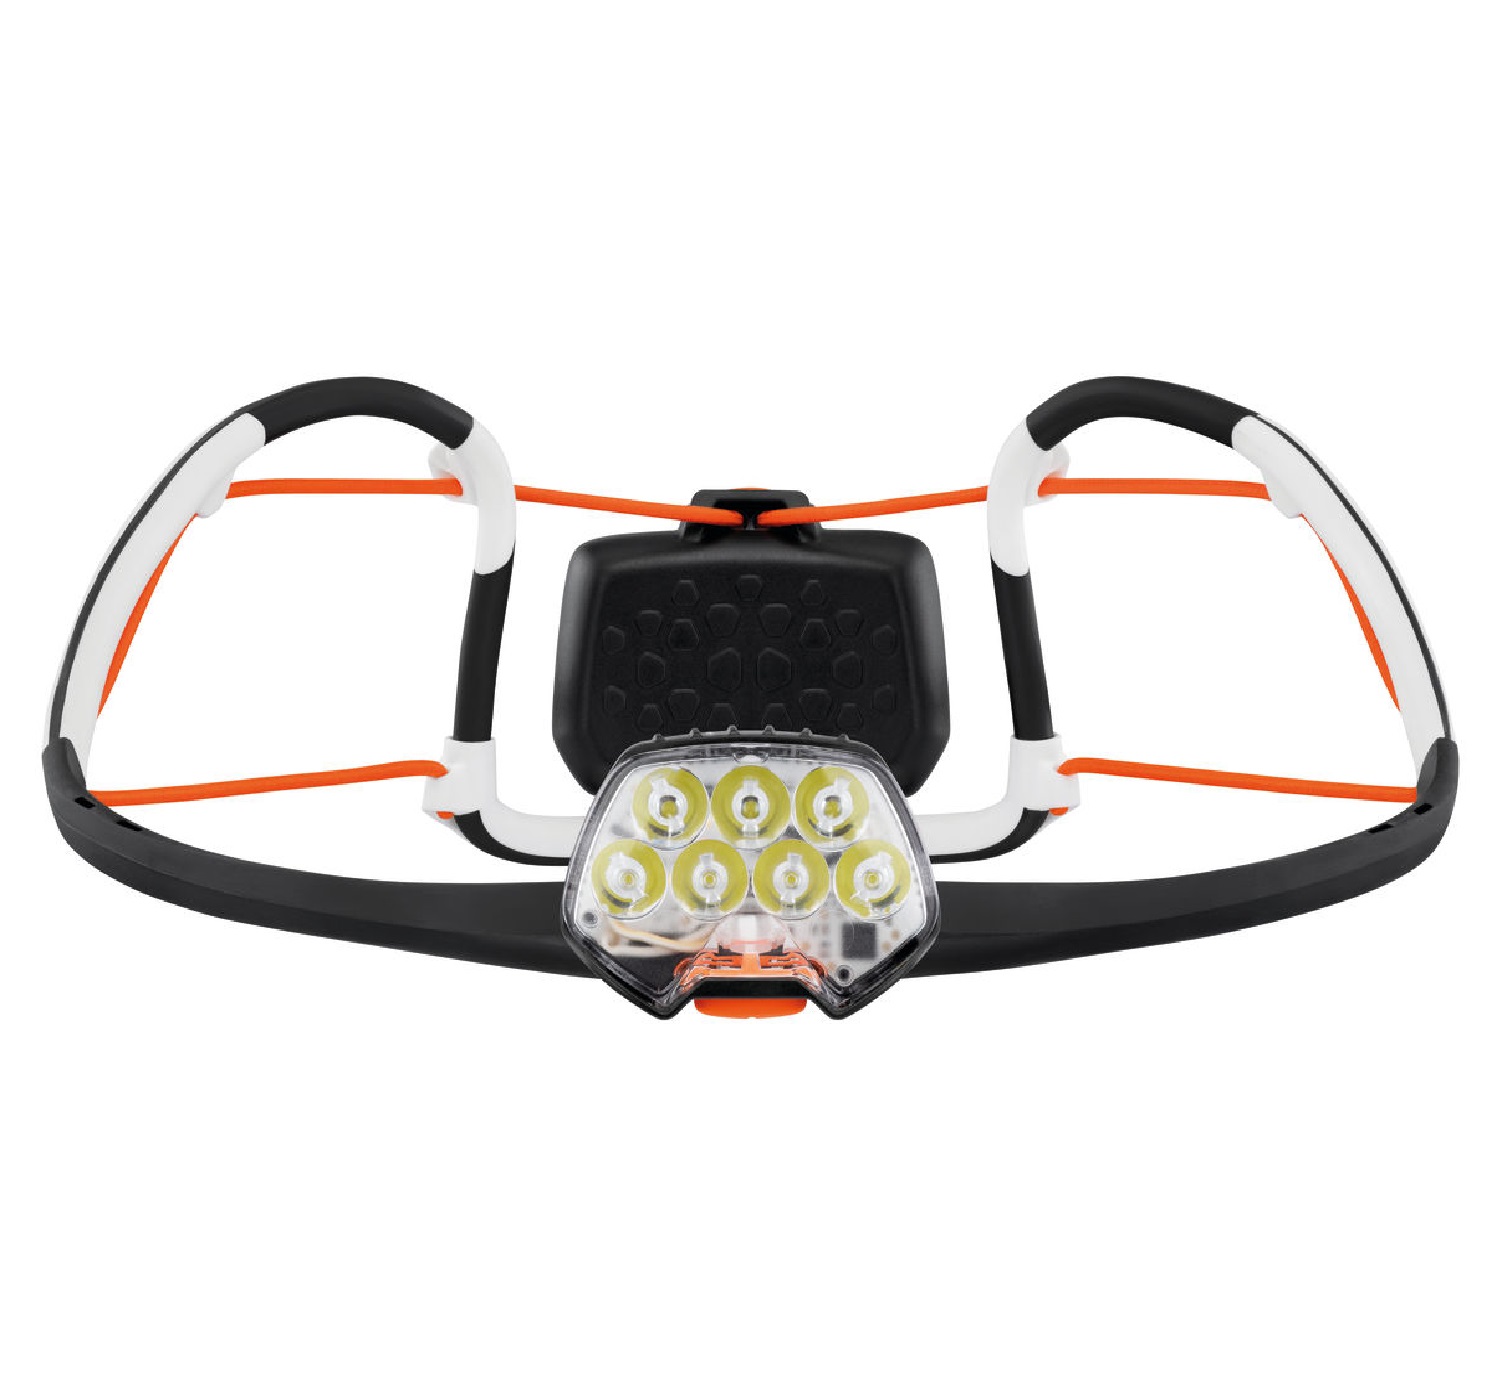 Petzl IKO Core Rechargeable Head Lamp With Multi-Beam And AIRFIT Headband 500 LUMENS